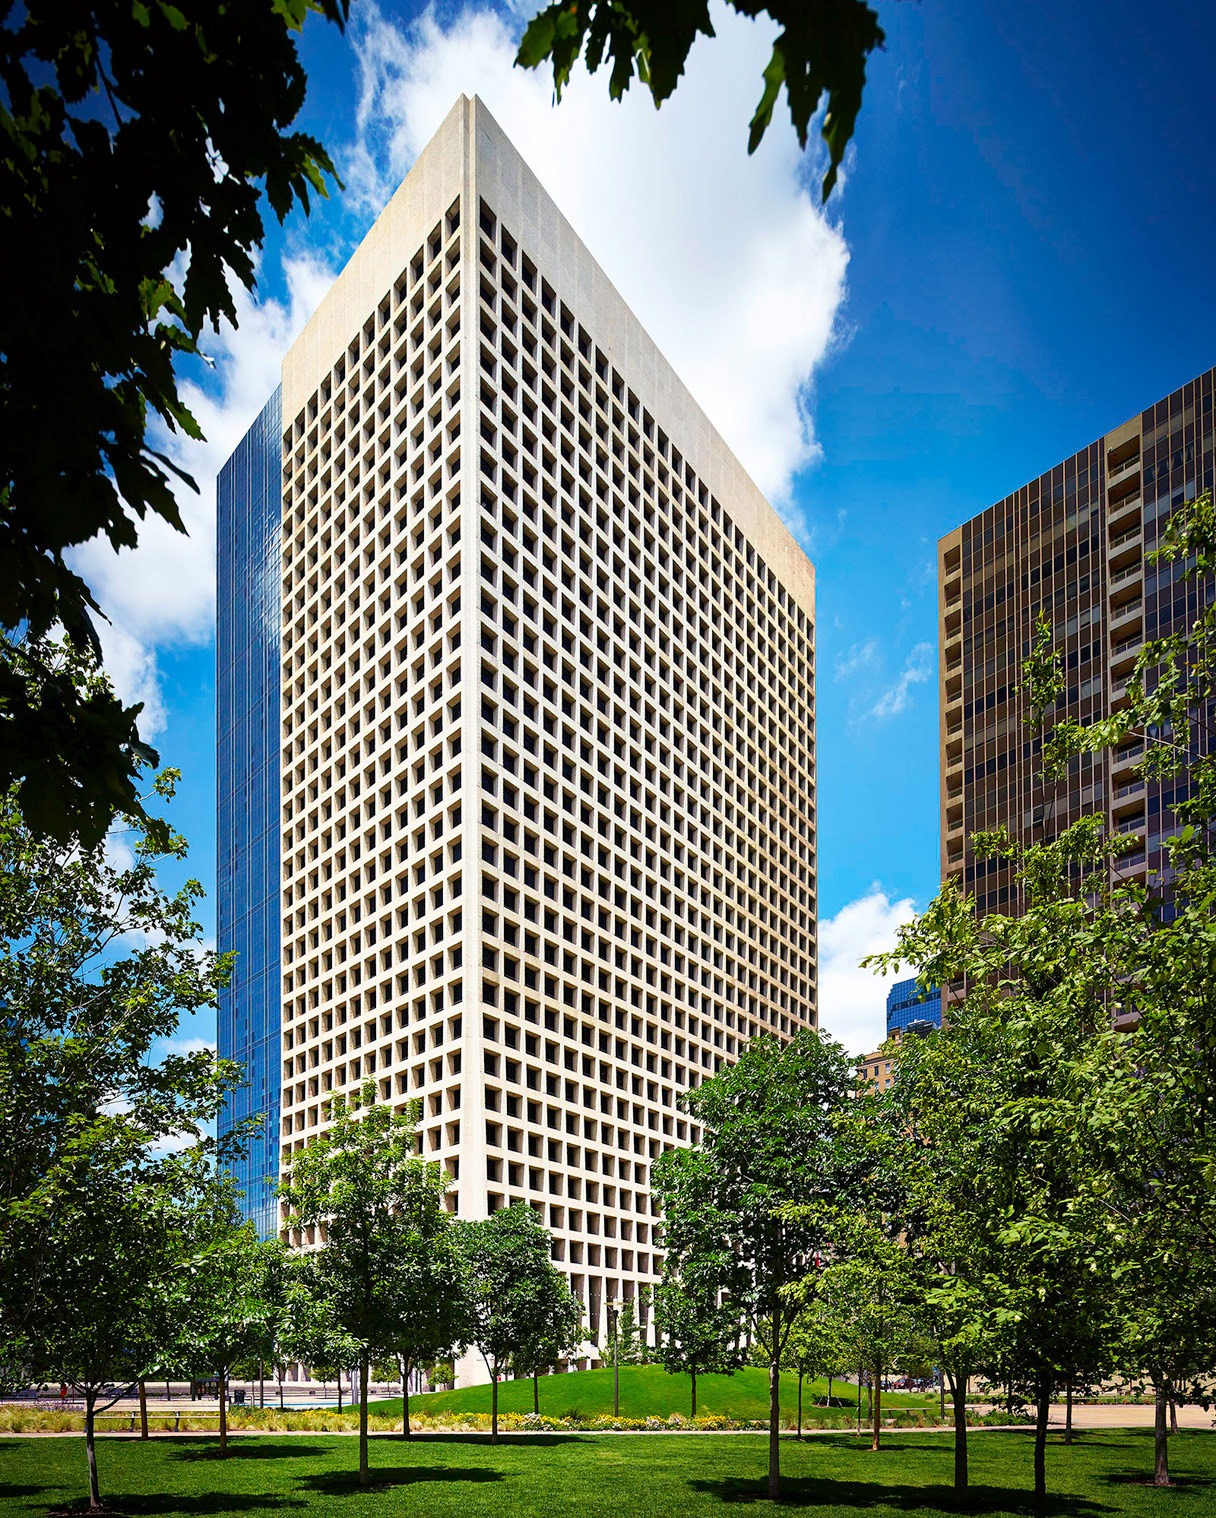 Stream Realty Partners Assigned Leasing and Management of Iconic 870,000 SF  Gold-Clad Towers in Dallas